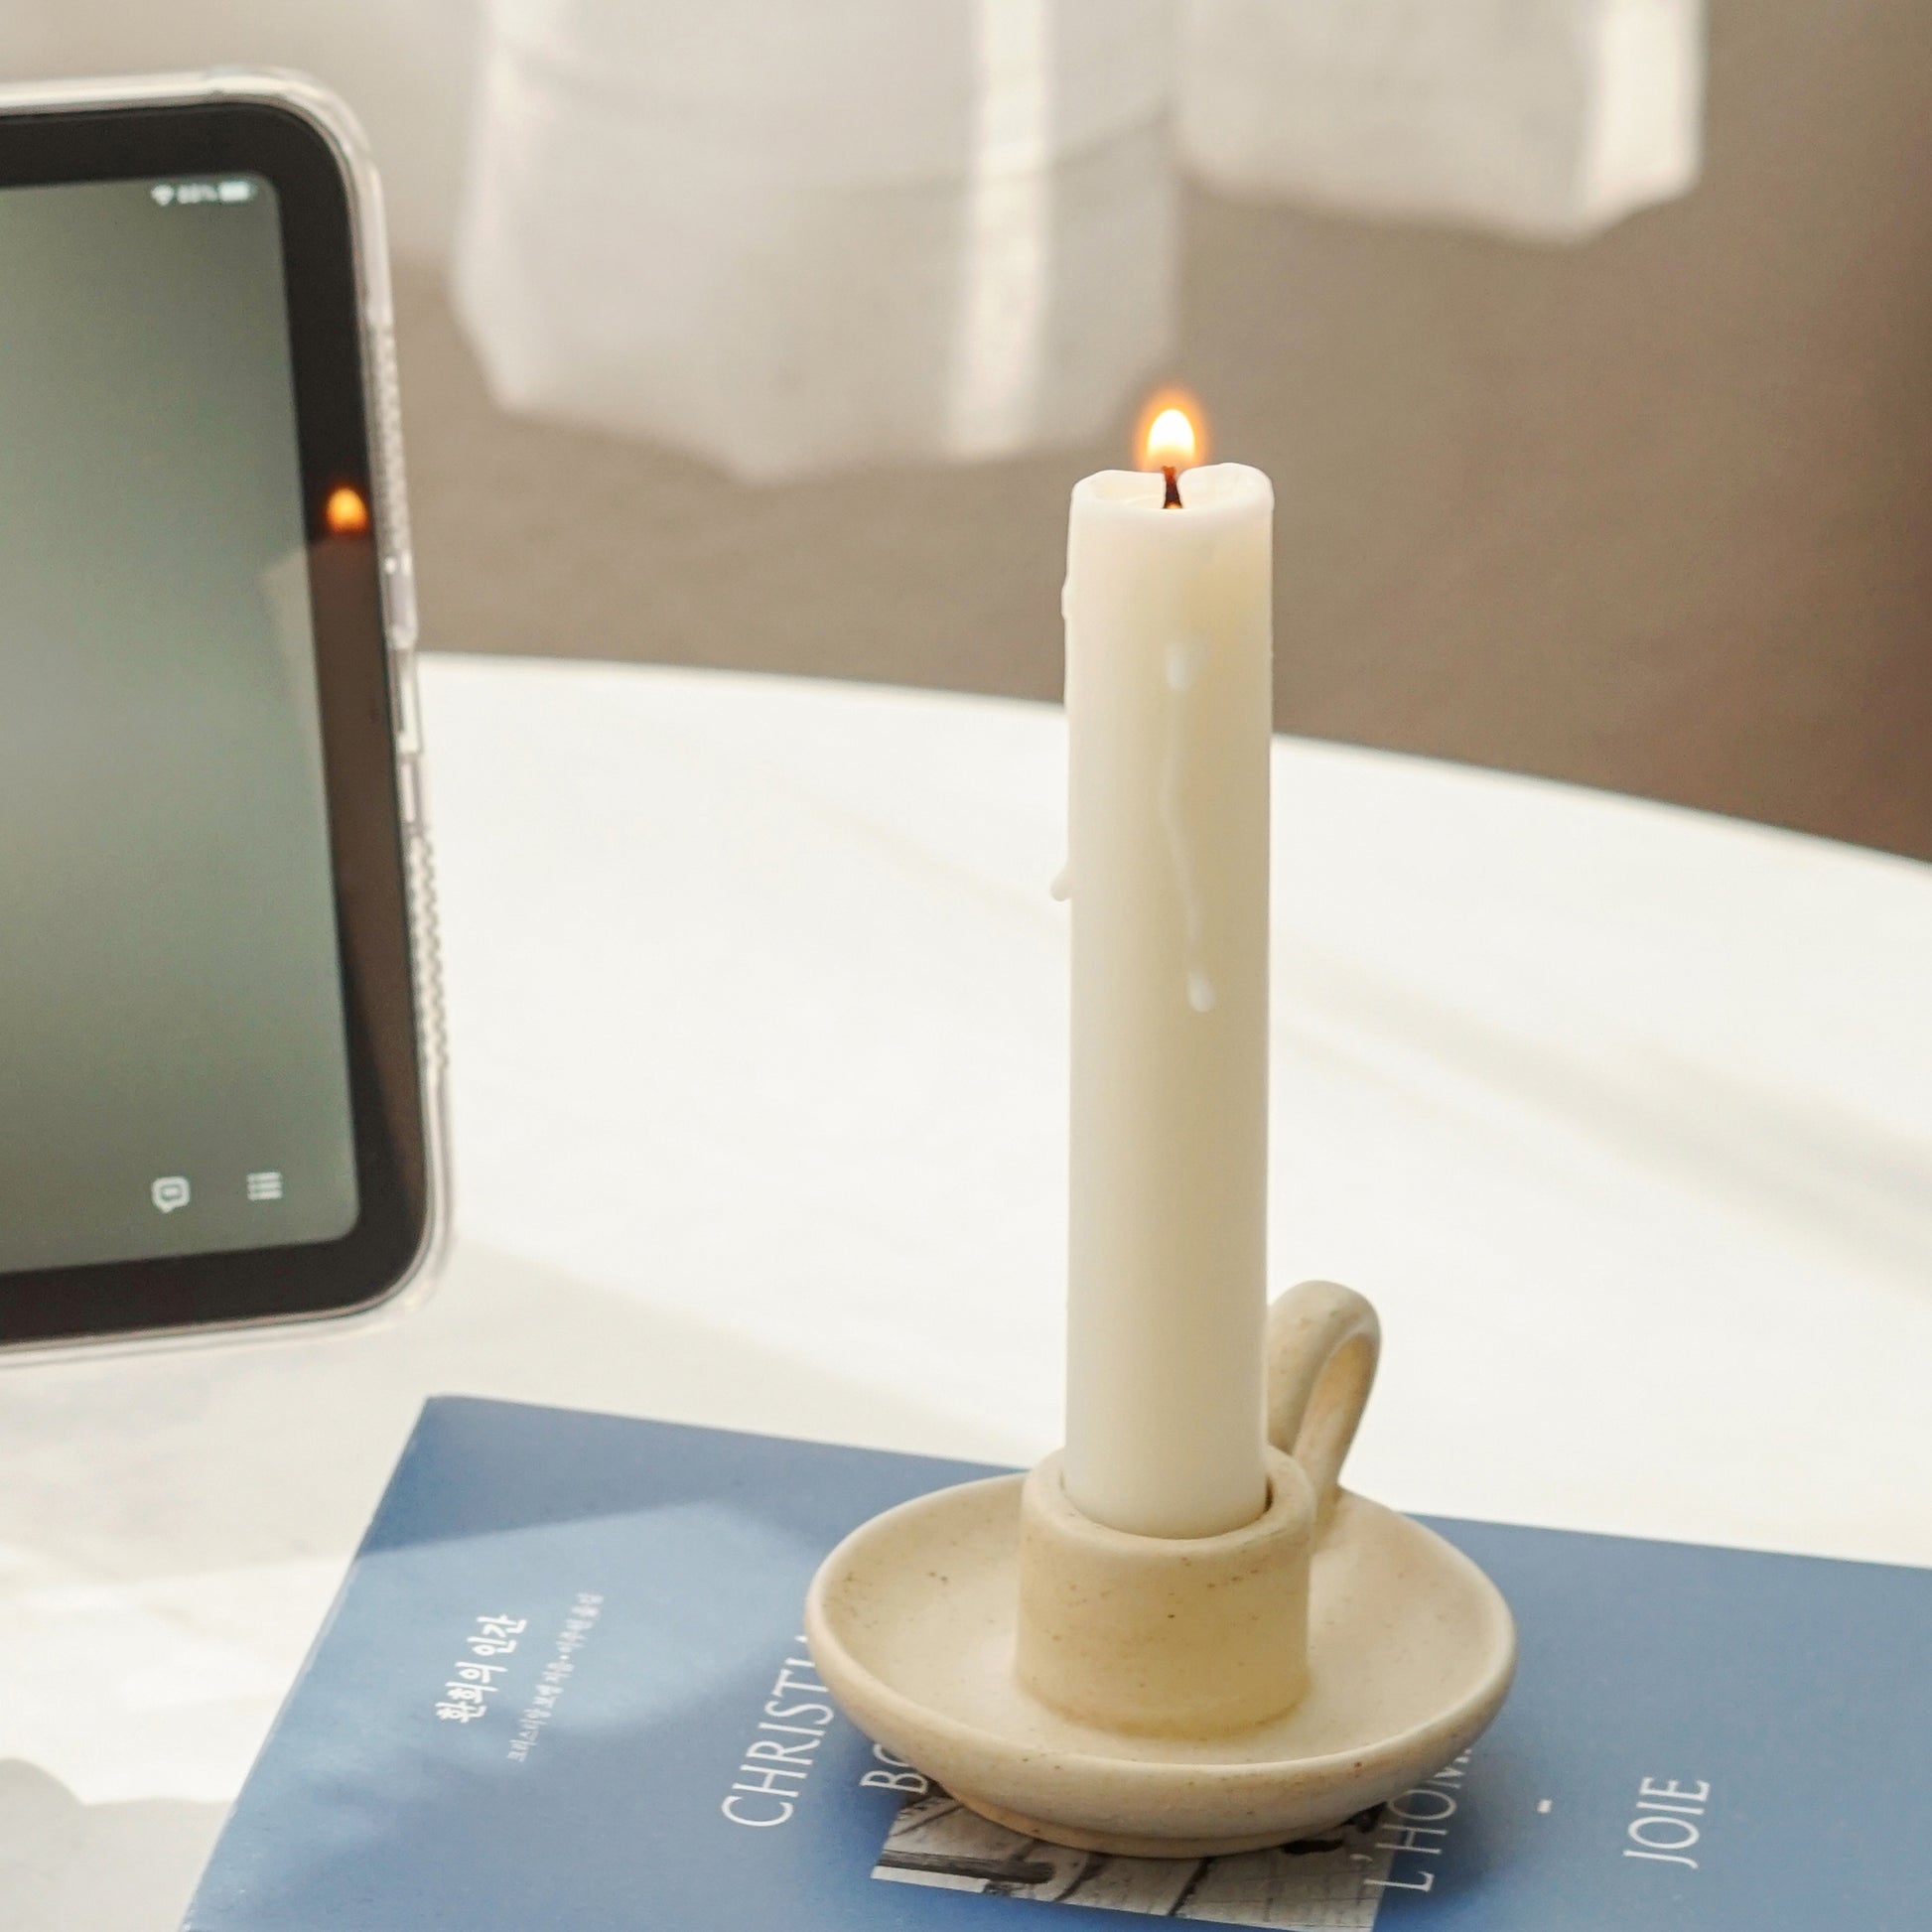 a lit white soy pillar taper candle in a beige neutral color candle holder placed on blue book and ipad mini playing the song Japanese Denim by Daniel Ceaser